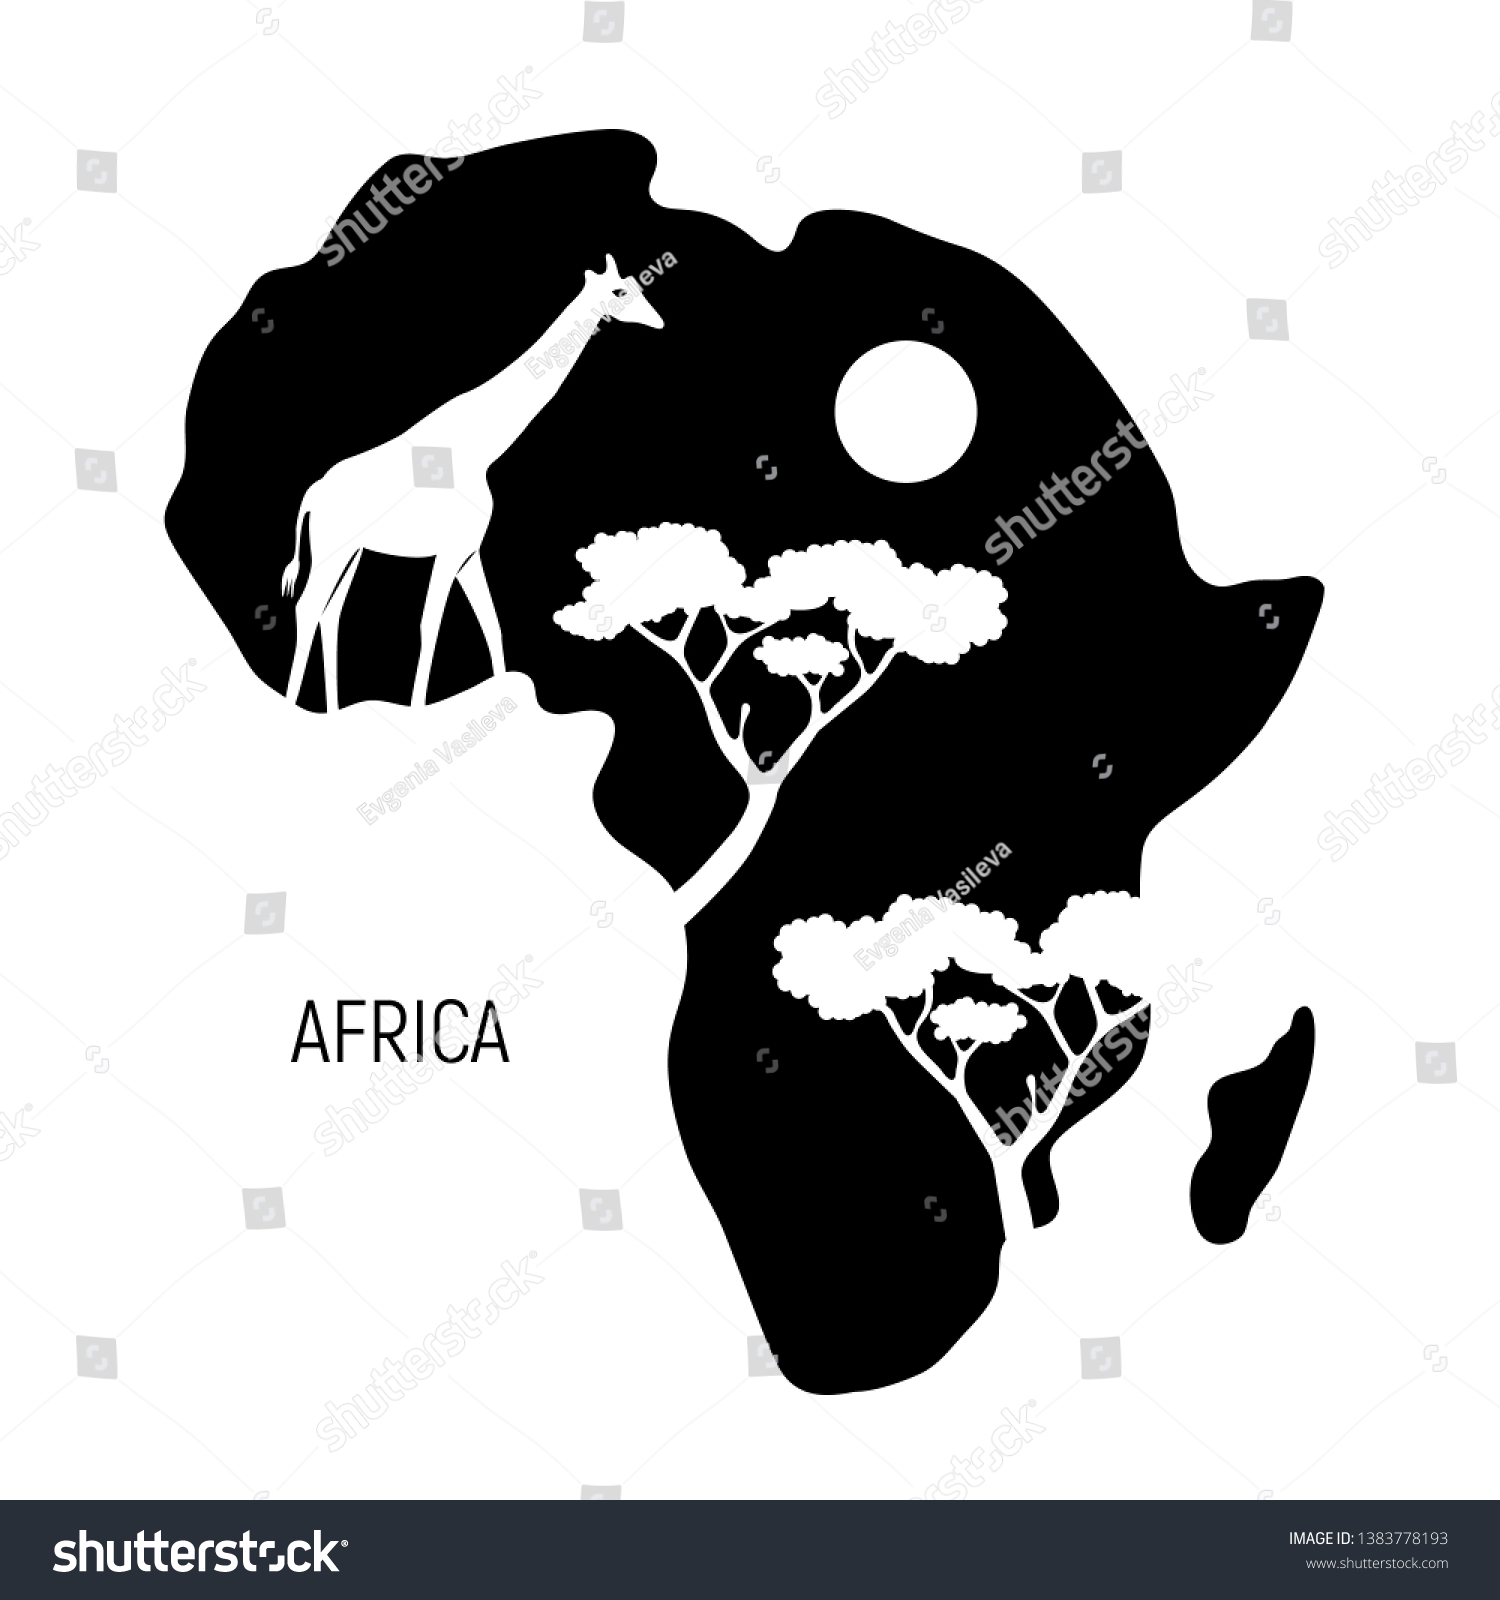 Africa Black White Map Africa Continent Stock Vector Royalty Free 1383778193 Shutterstock 7118